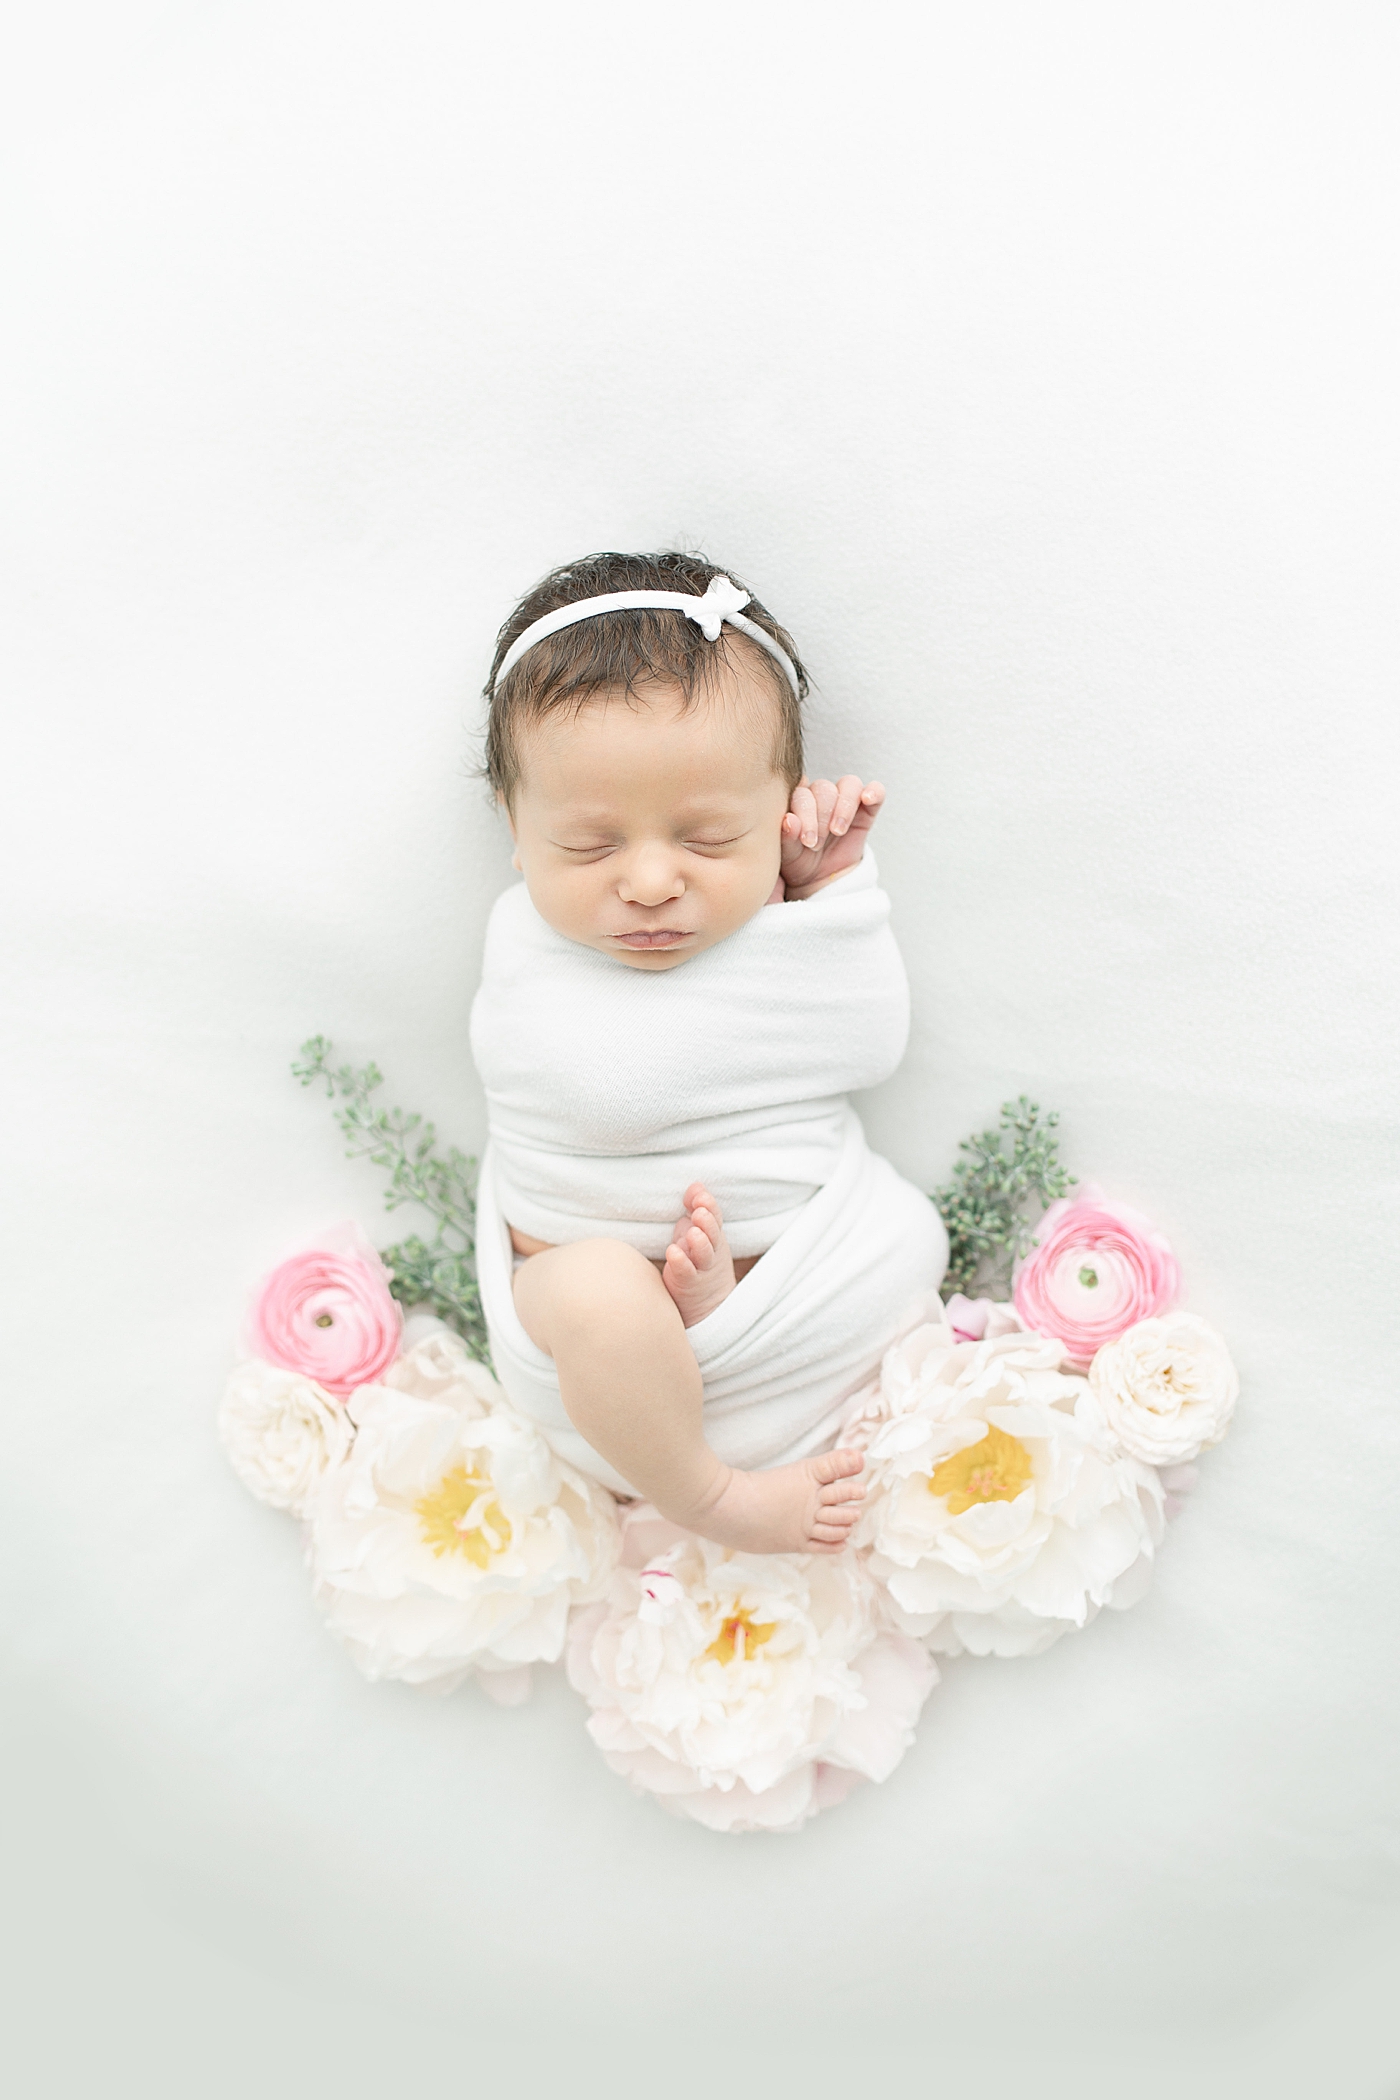 Baby girl sleeping with florals | Photo by Little Sunshine Photography 